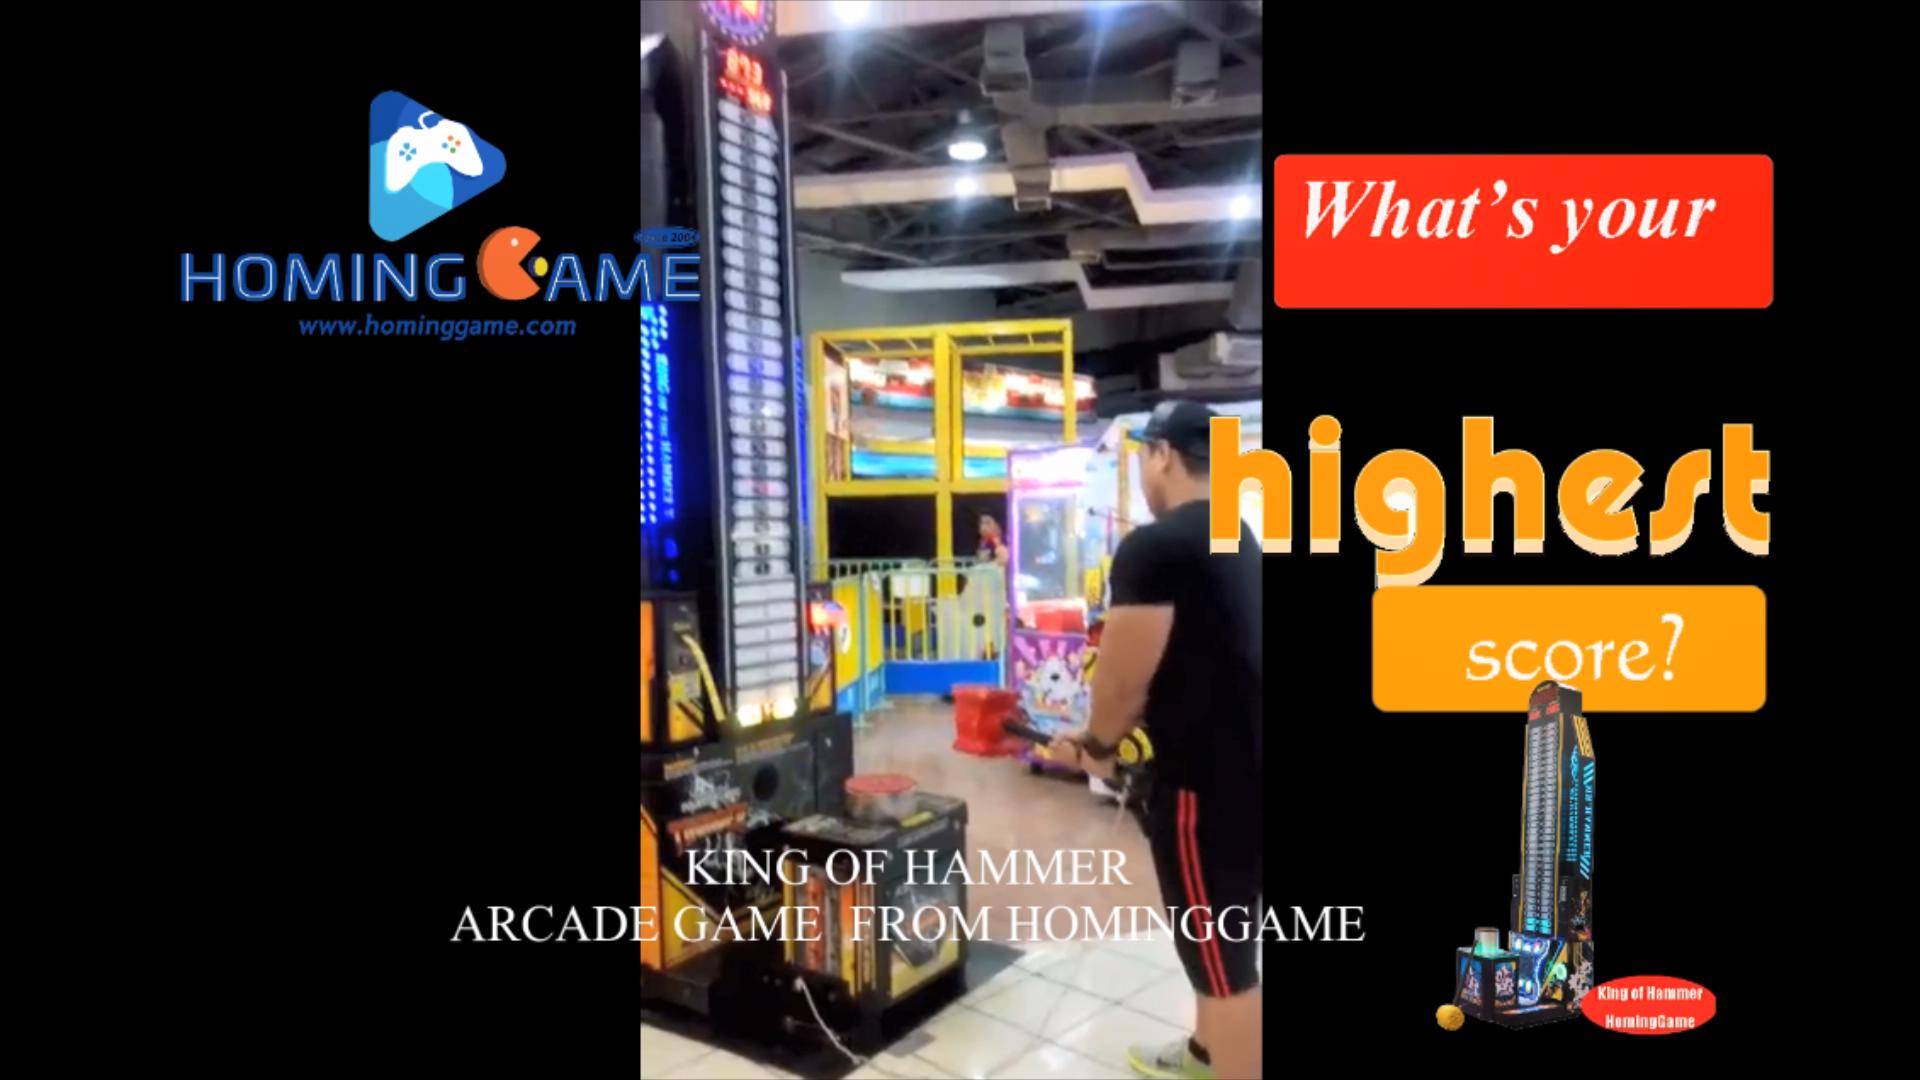 2021 People Like Playing HomingGame Best Coin Operated King Of Hammer Arcade Game Machine(Order Call Whatsapp:+8618688409495),king of hammer arcade game machine,king of hammer,mr hammer 2 arcade game machine,mr hammer 2 boxing arcade game machine,mr hammer 2 amusement boxing arcade game machine,mr hammer 2 king of hammer arcade game machine,king of hammer arcade game mahcine,king of hammer,hammer arcade game,hammer boxing arcade game machine,hammer boxing game machine,coin operated mr hammer 2 boxing arcade game machine,coin operated king of hammer arcade game machine,game machine,arcade game machine,coin operated game machine,amusement park game equipment,amusement machine,entertainment game,family entertainment game machine,entertainment machine,indoor game machine,lottery game machine,redemption game machine,redemption game,arcade games,arcade game machine for sale,hominggame,www.gametube.hk,hammer machine,kids game equipment,kids lottery game machine,FEC game center game machine,FEC game,electrical kids game machine,children game machine,redemption ticket game machine